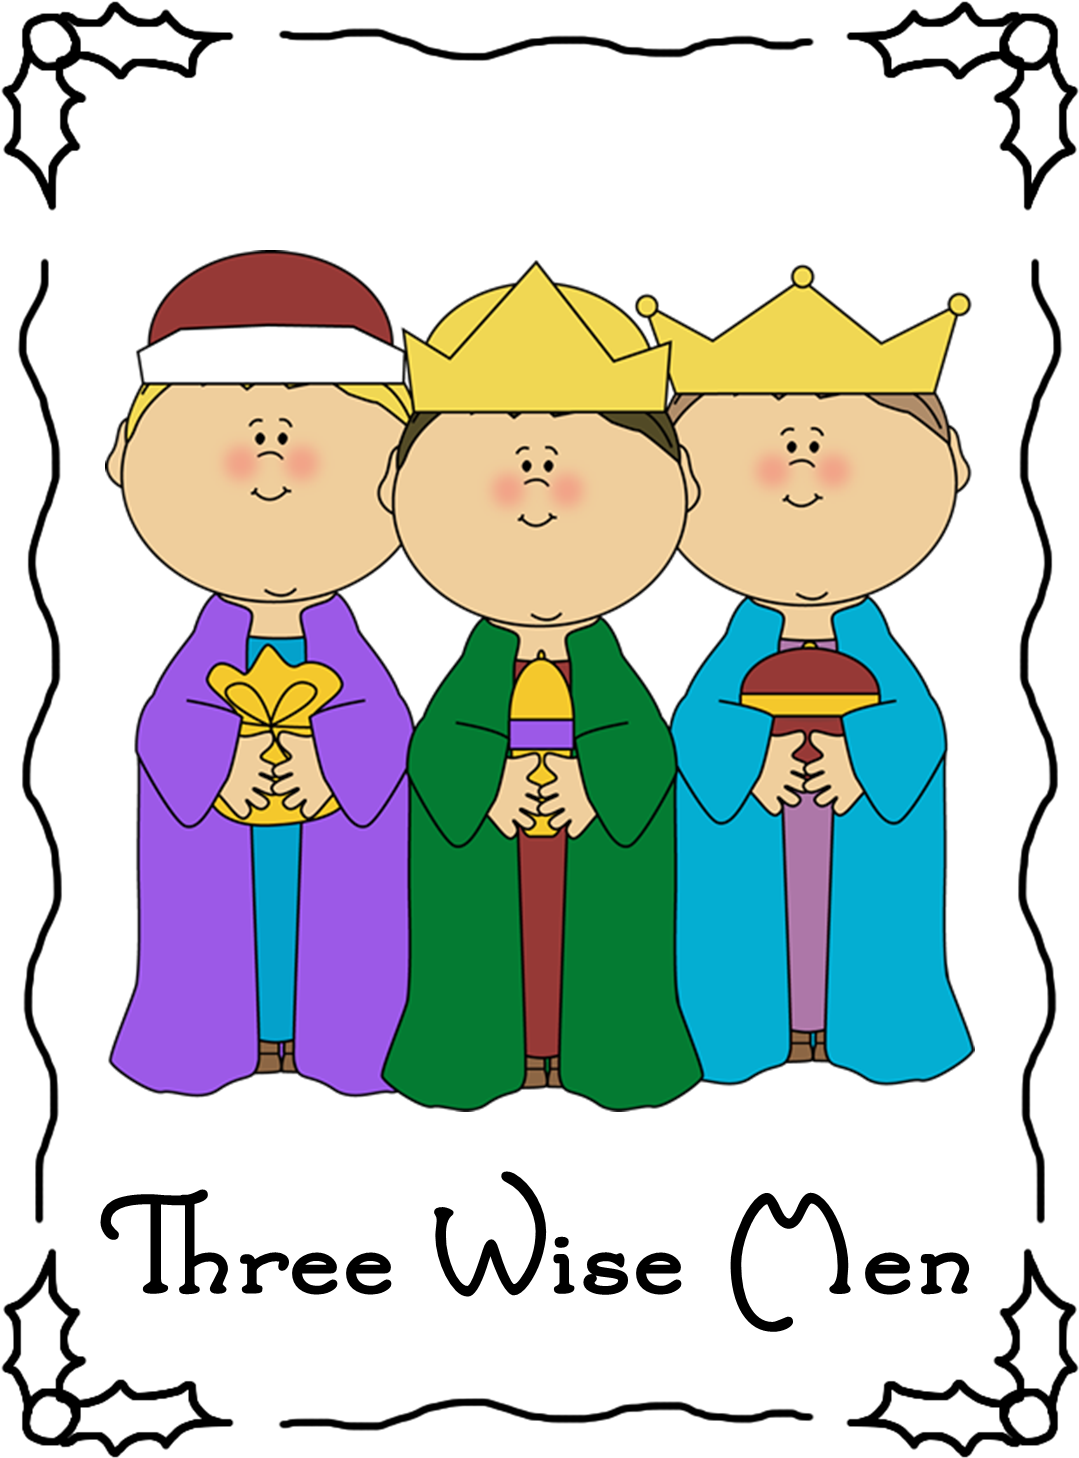 They Are The Three Wise Men - Three Wise Men Flashcard (1441x1493)